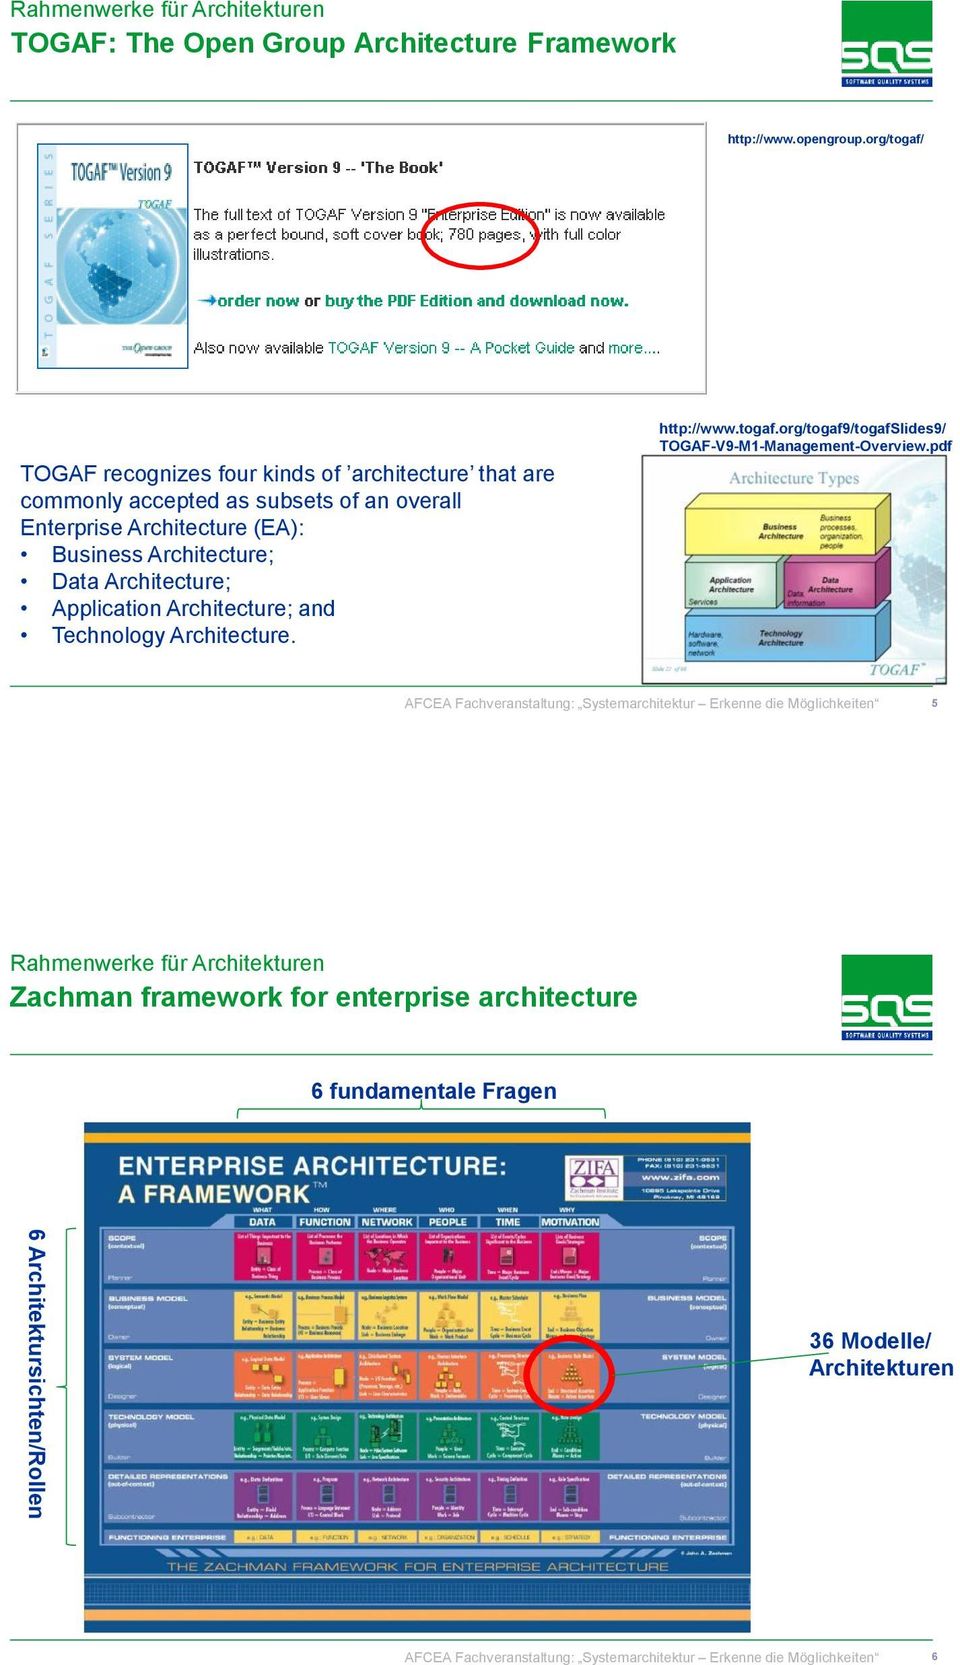 Business Architecture; Data Architecture; Application Architecture; and Technology Architecture. http://www.togaf.